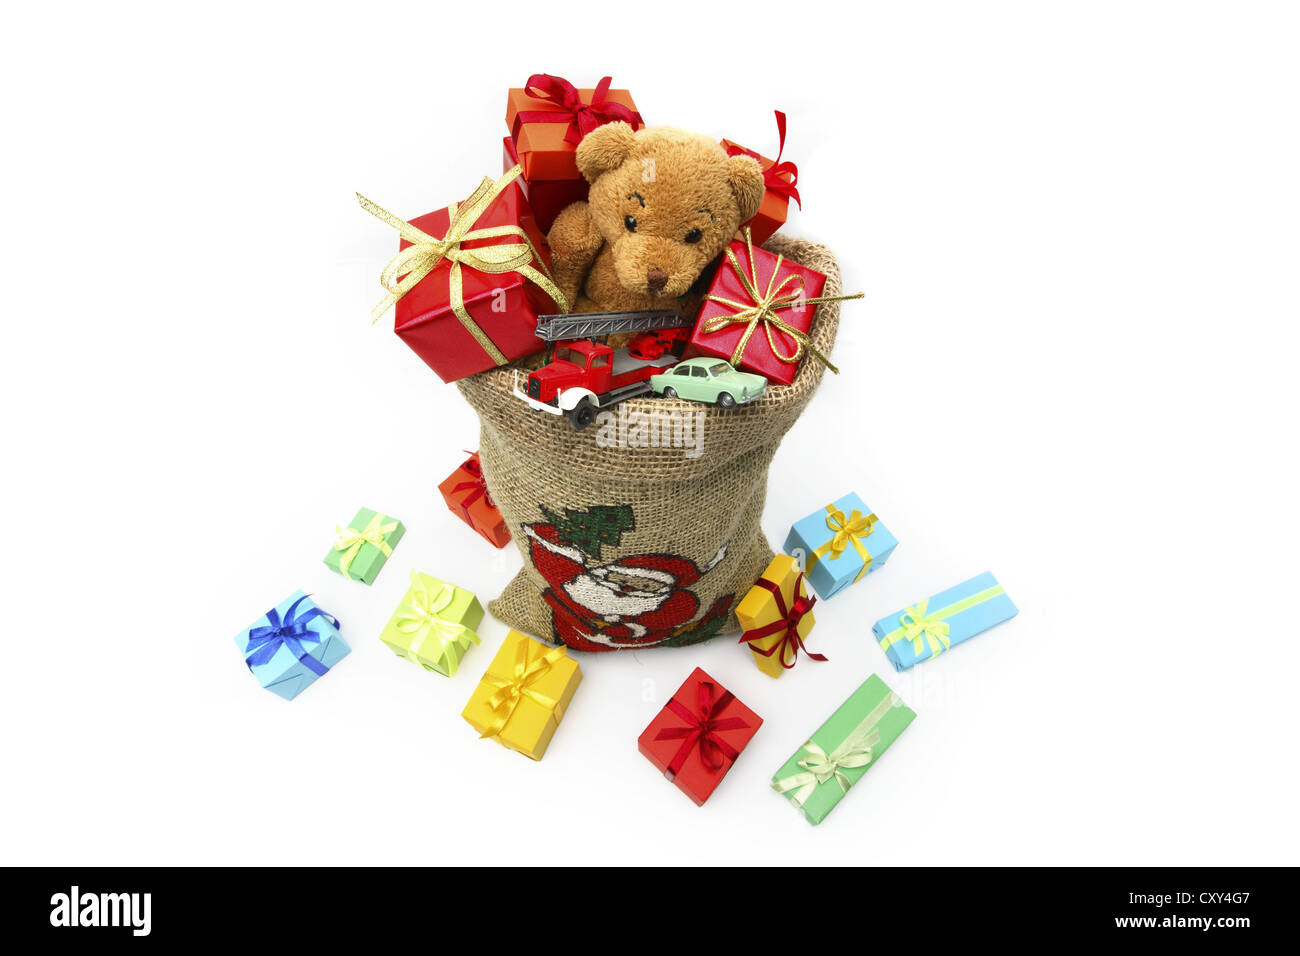 Christms sack filled with Christmas gifts, a teddy bear and toy cars Stock Photo